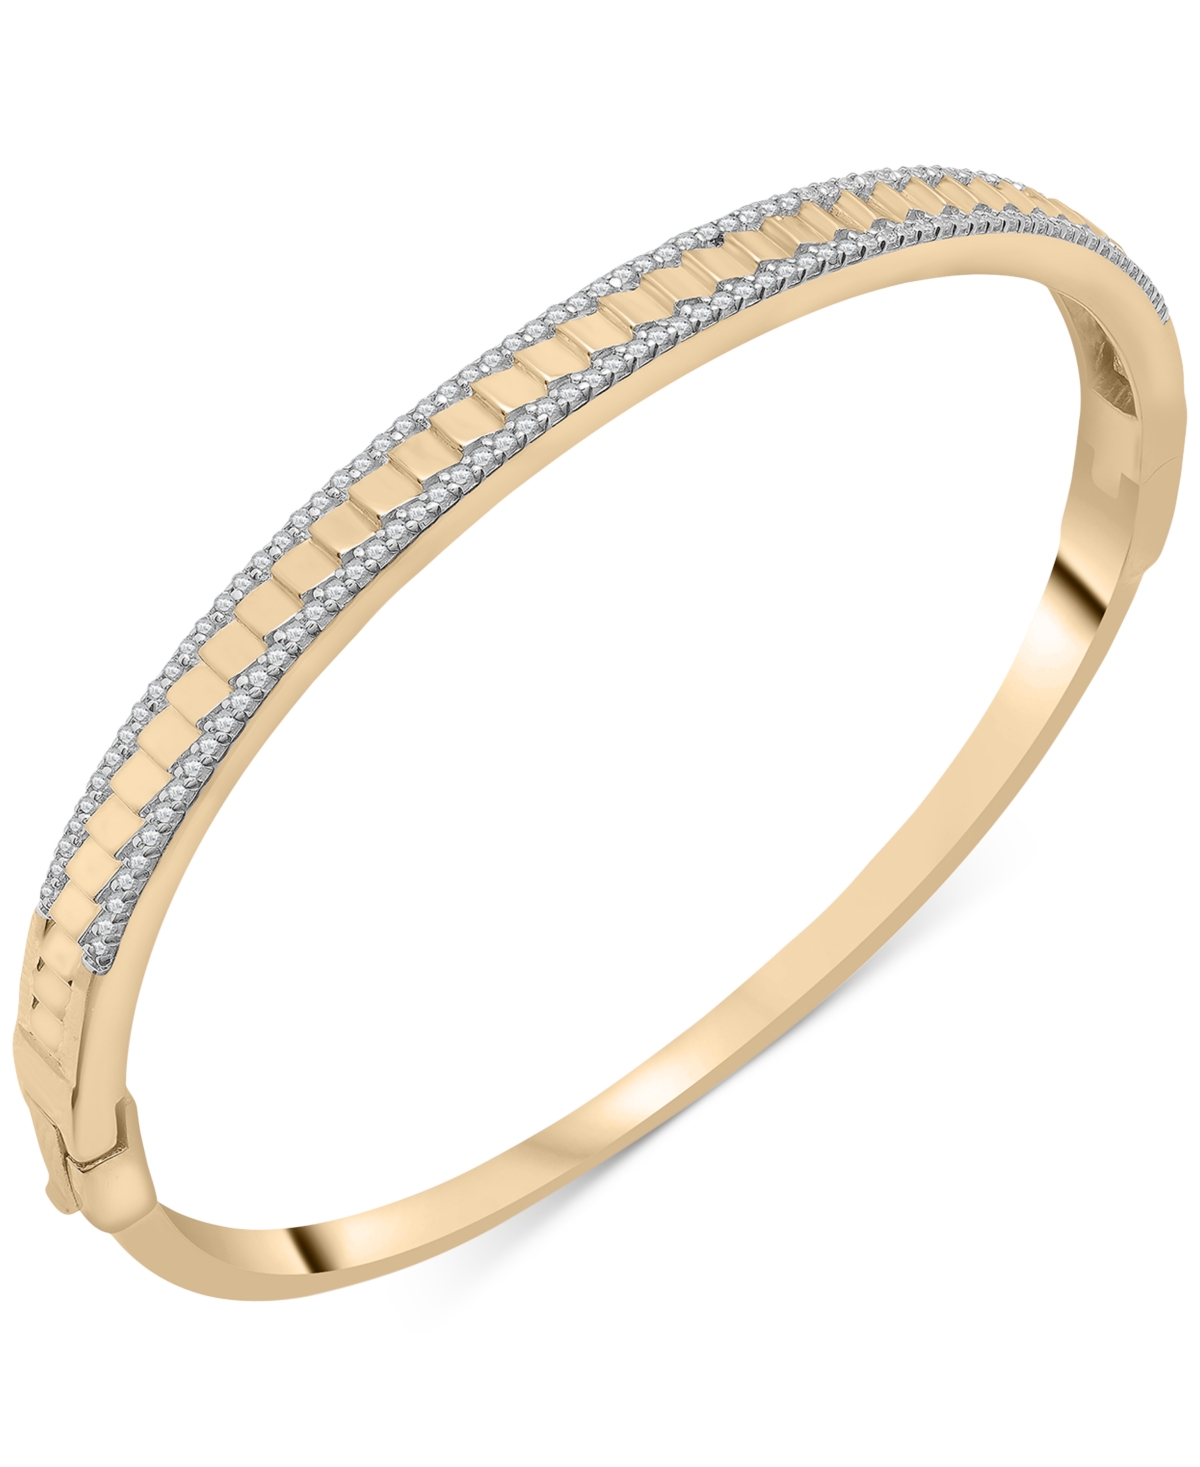 Diamond Textured Bangle Bracelet (1/2 ct. t.w.) in Gold Vermeil, Created for Macy's - Gold Vermeil